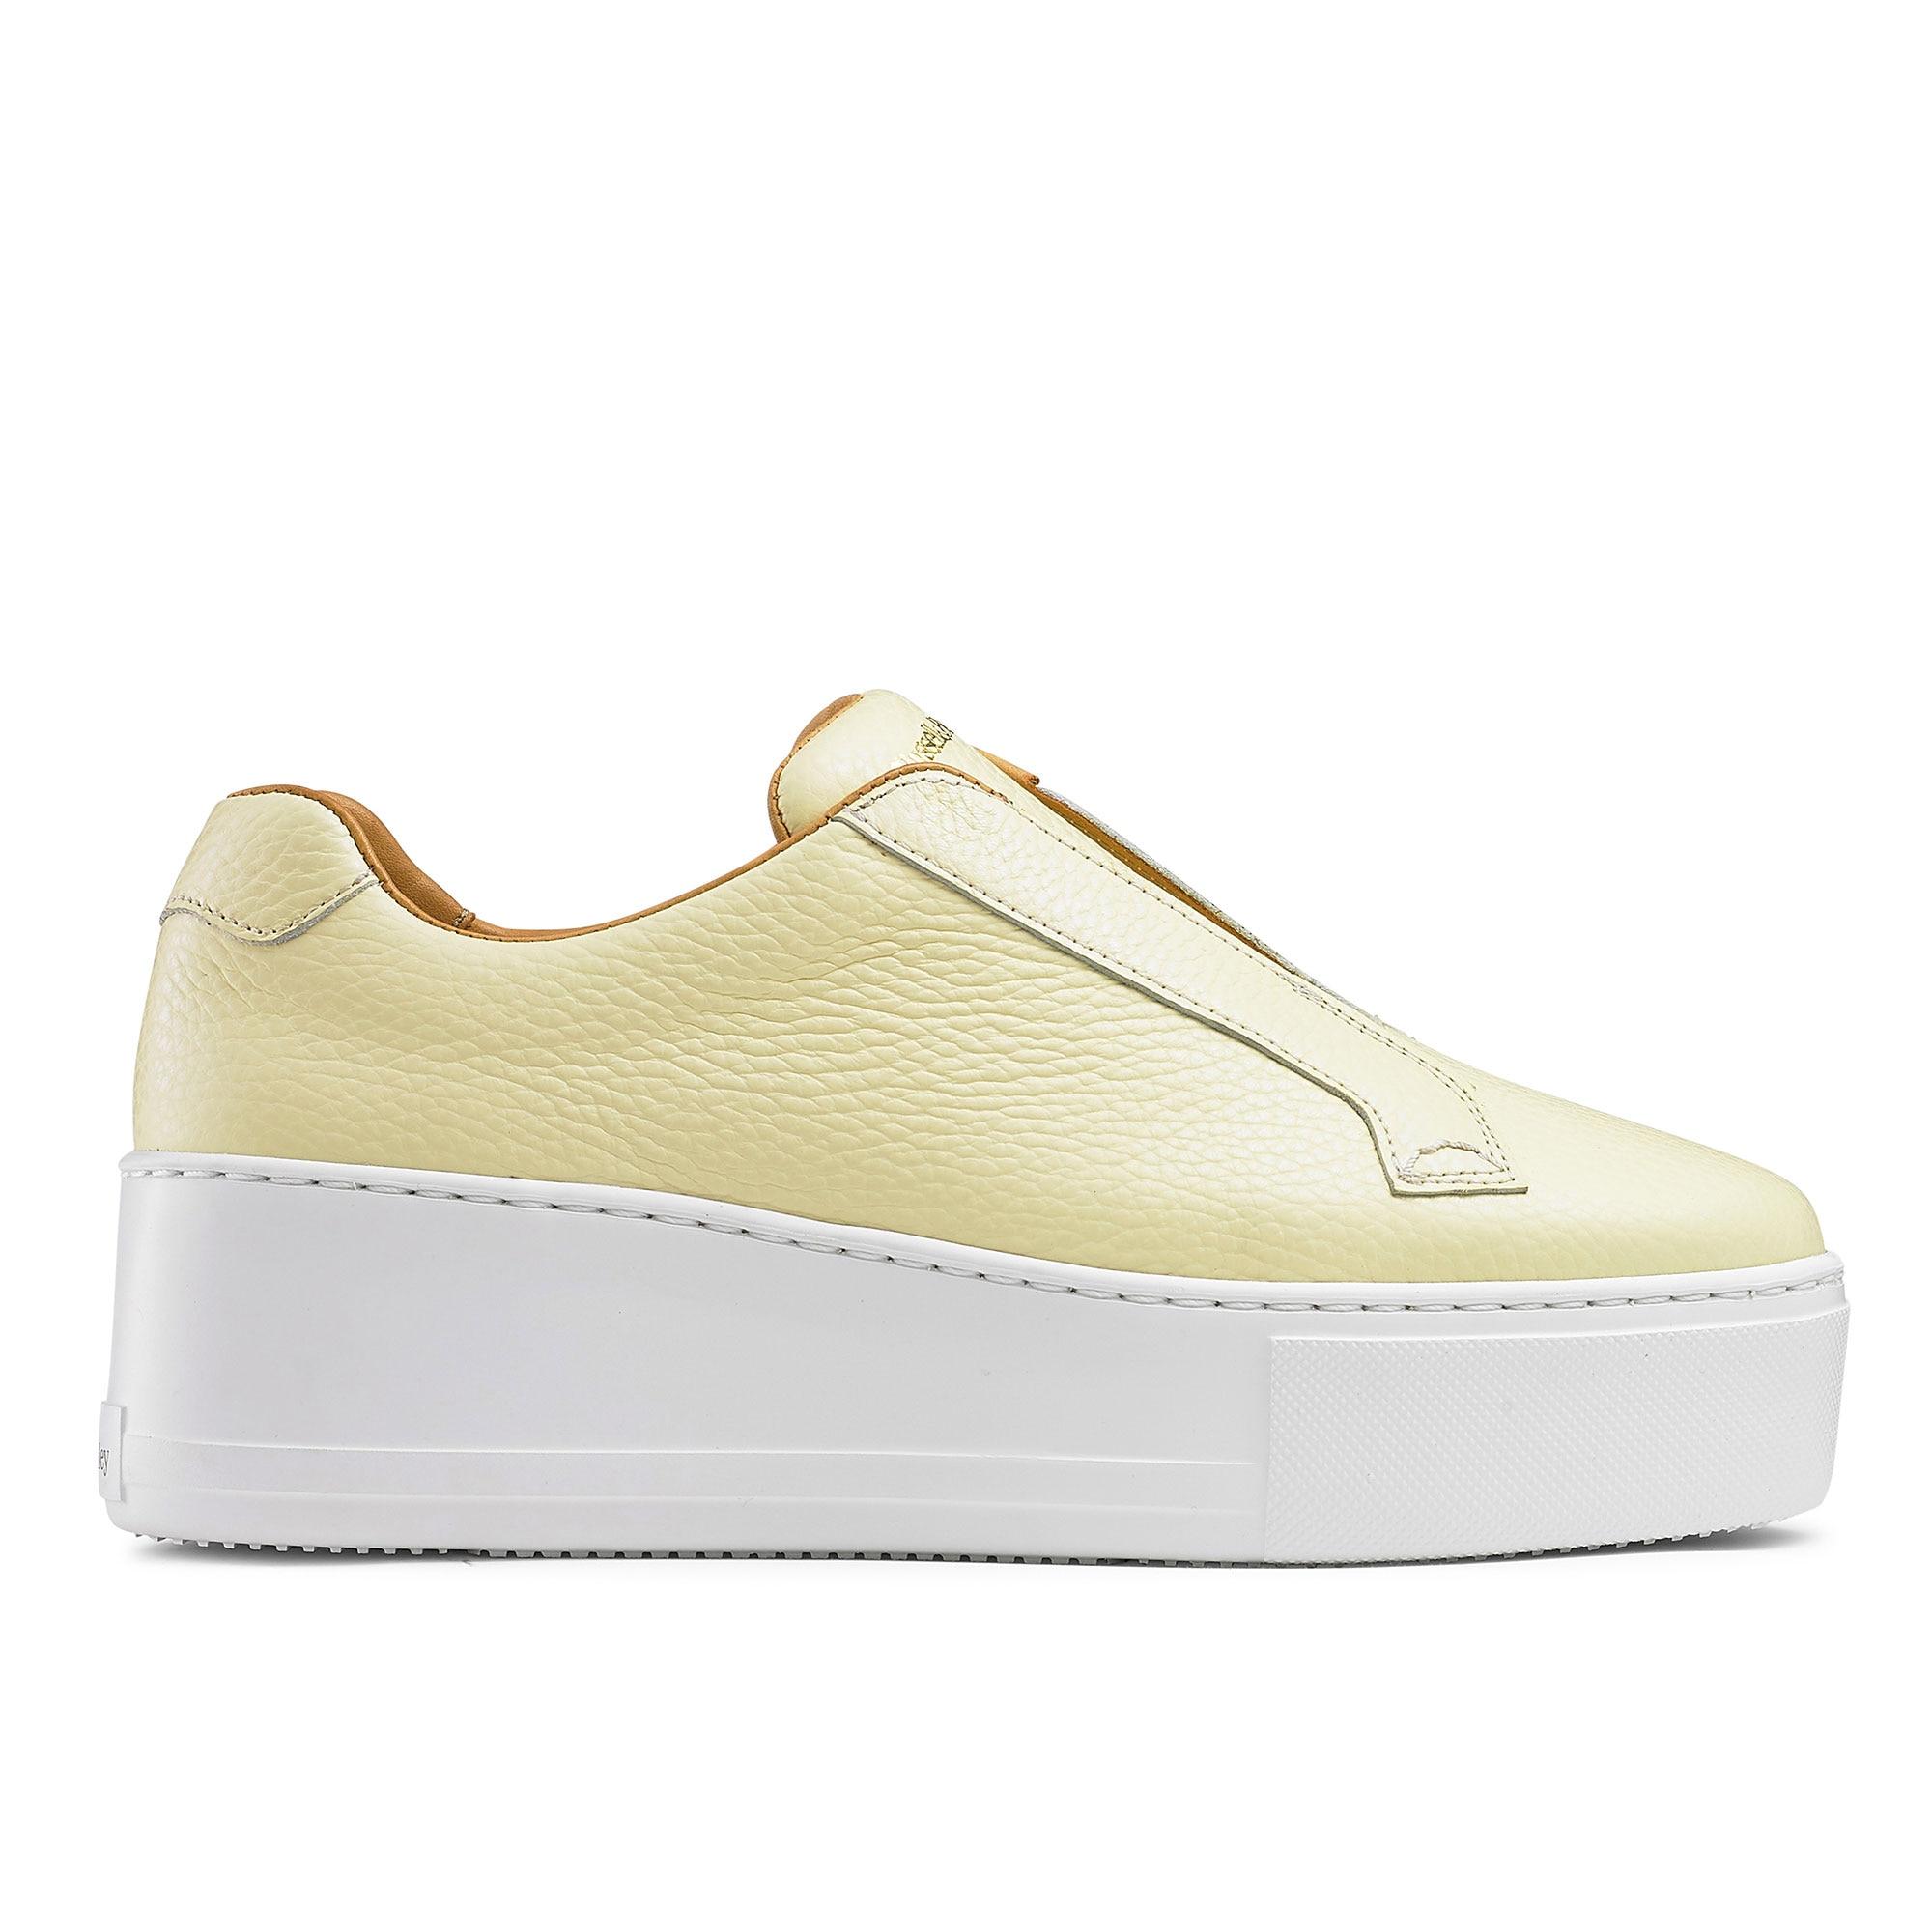 Russell & Bromley Park Up Flatform Laceless Sneaker in Yellow | Lyst UK